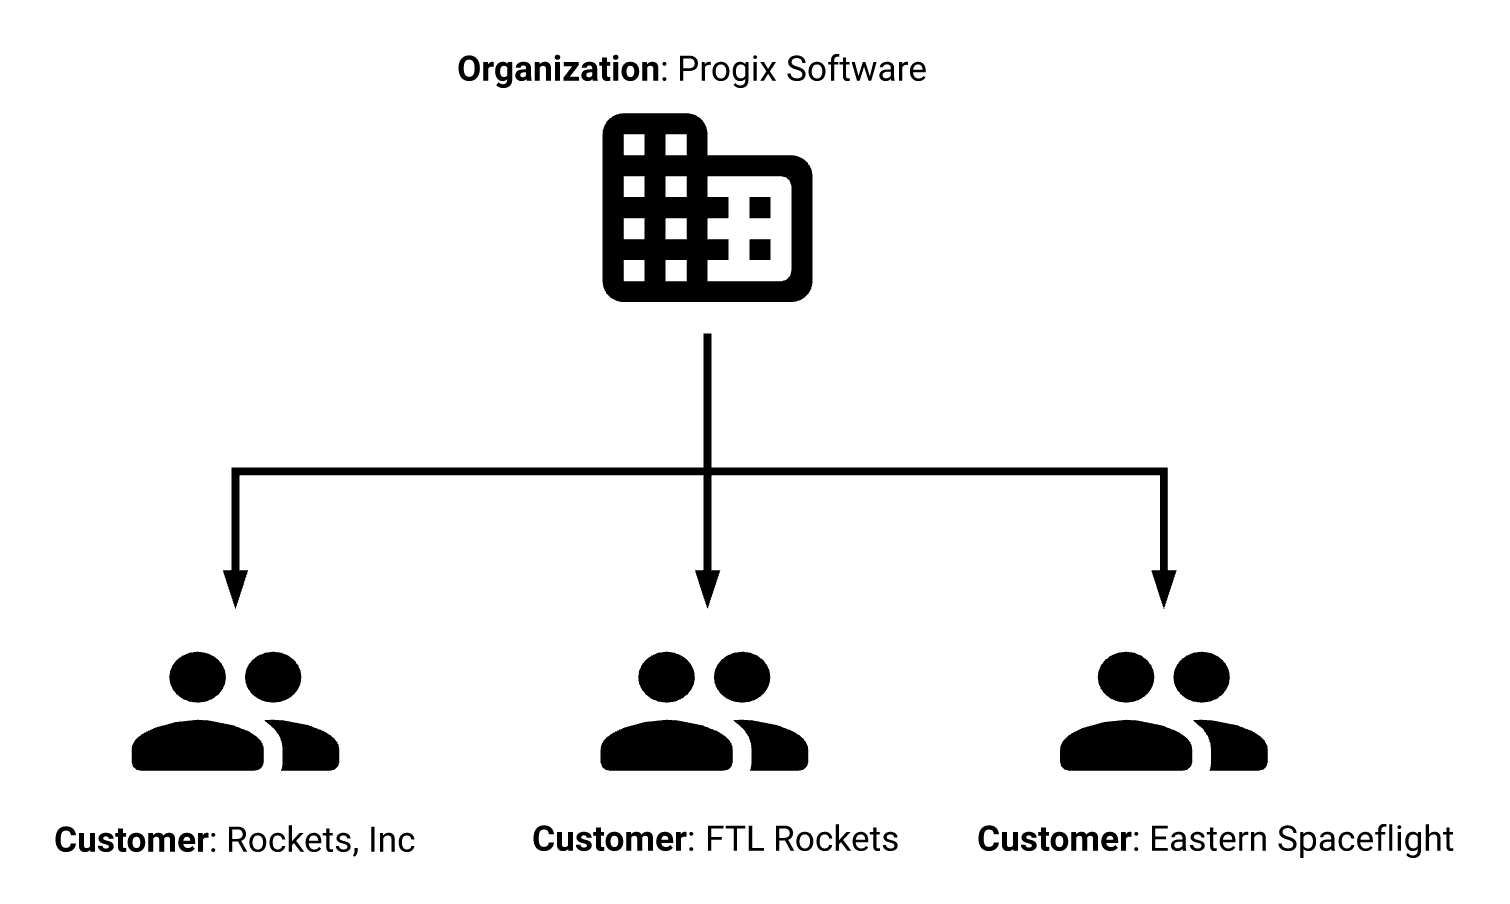 Diagram of an organization with customers